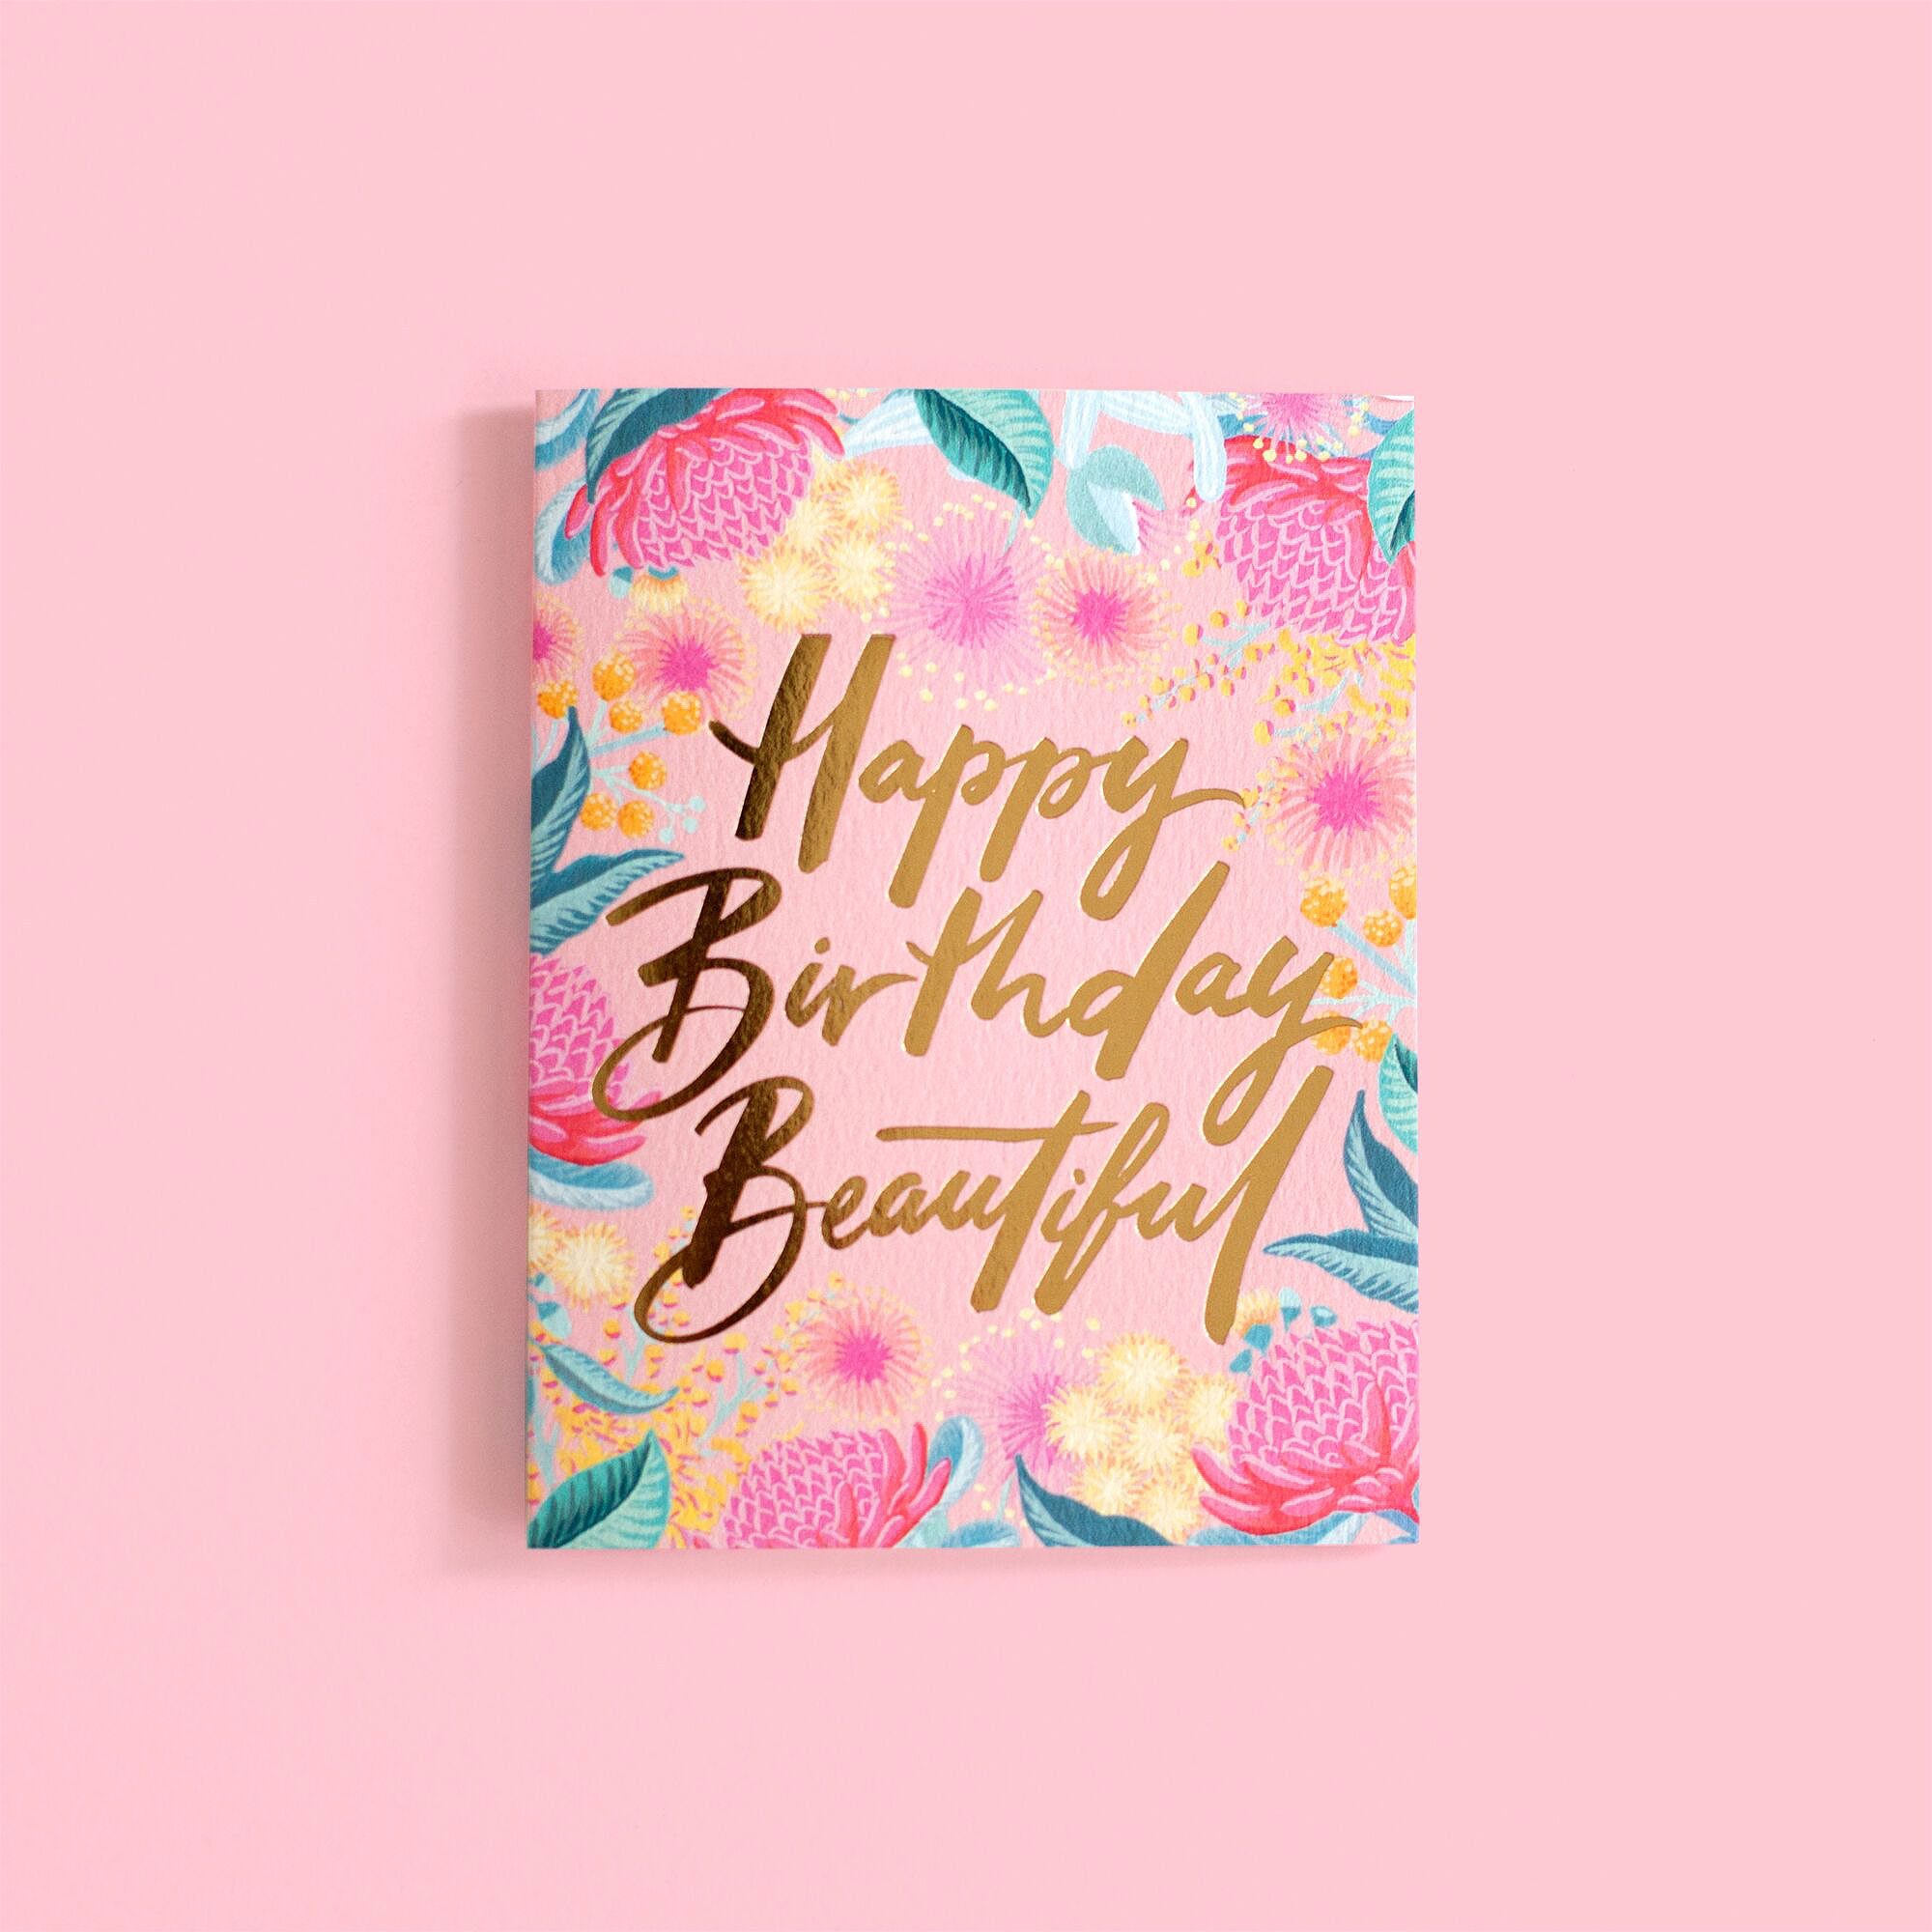 Happy Birthday Beautiful Greeting Card - LUXAH Gifts and Homewares